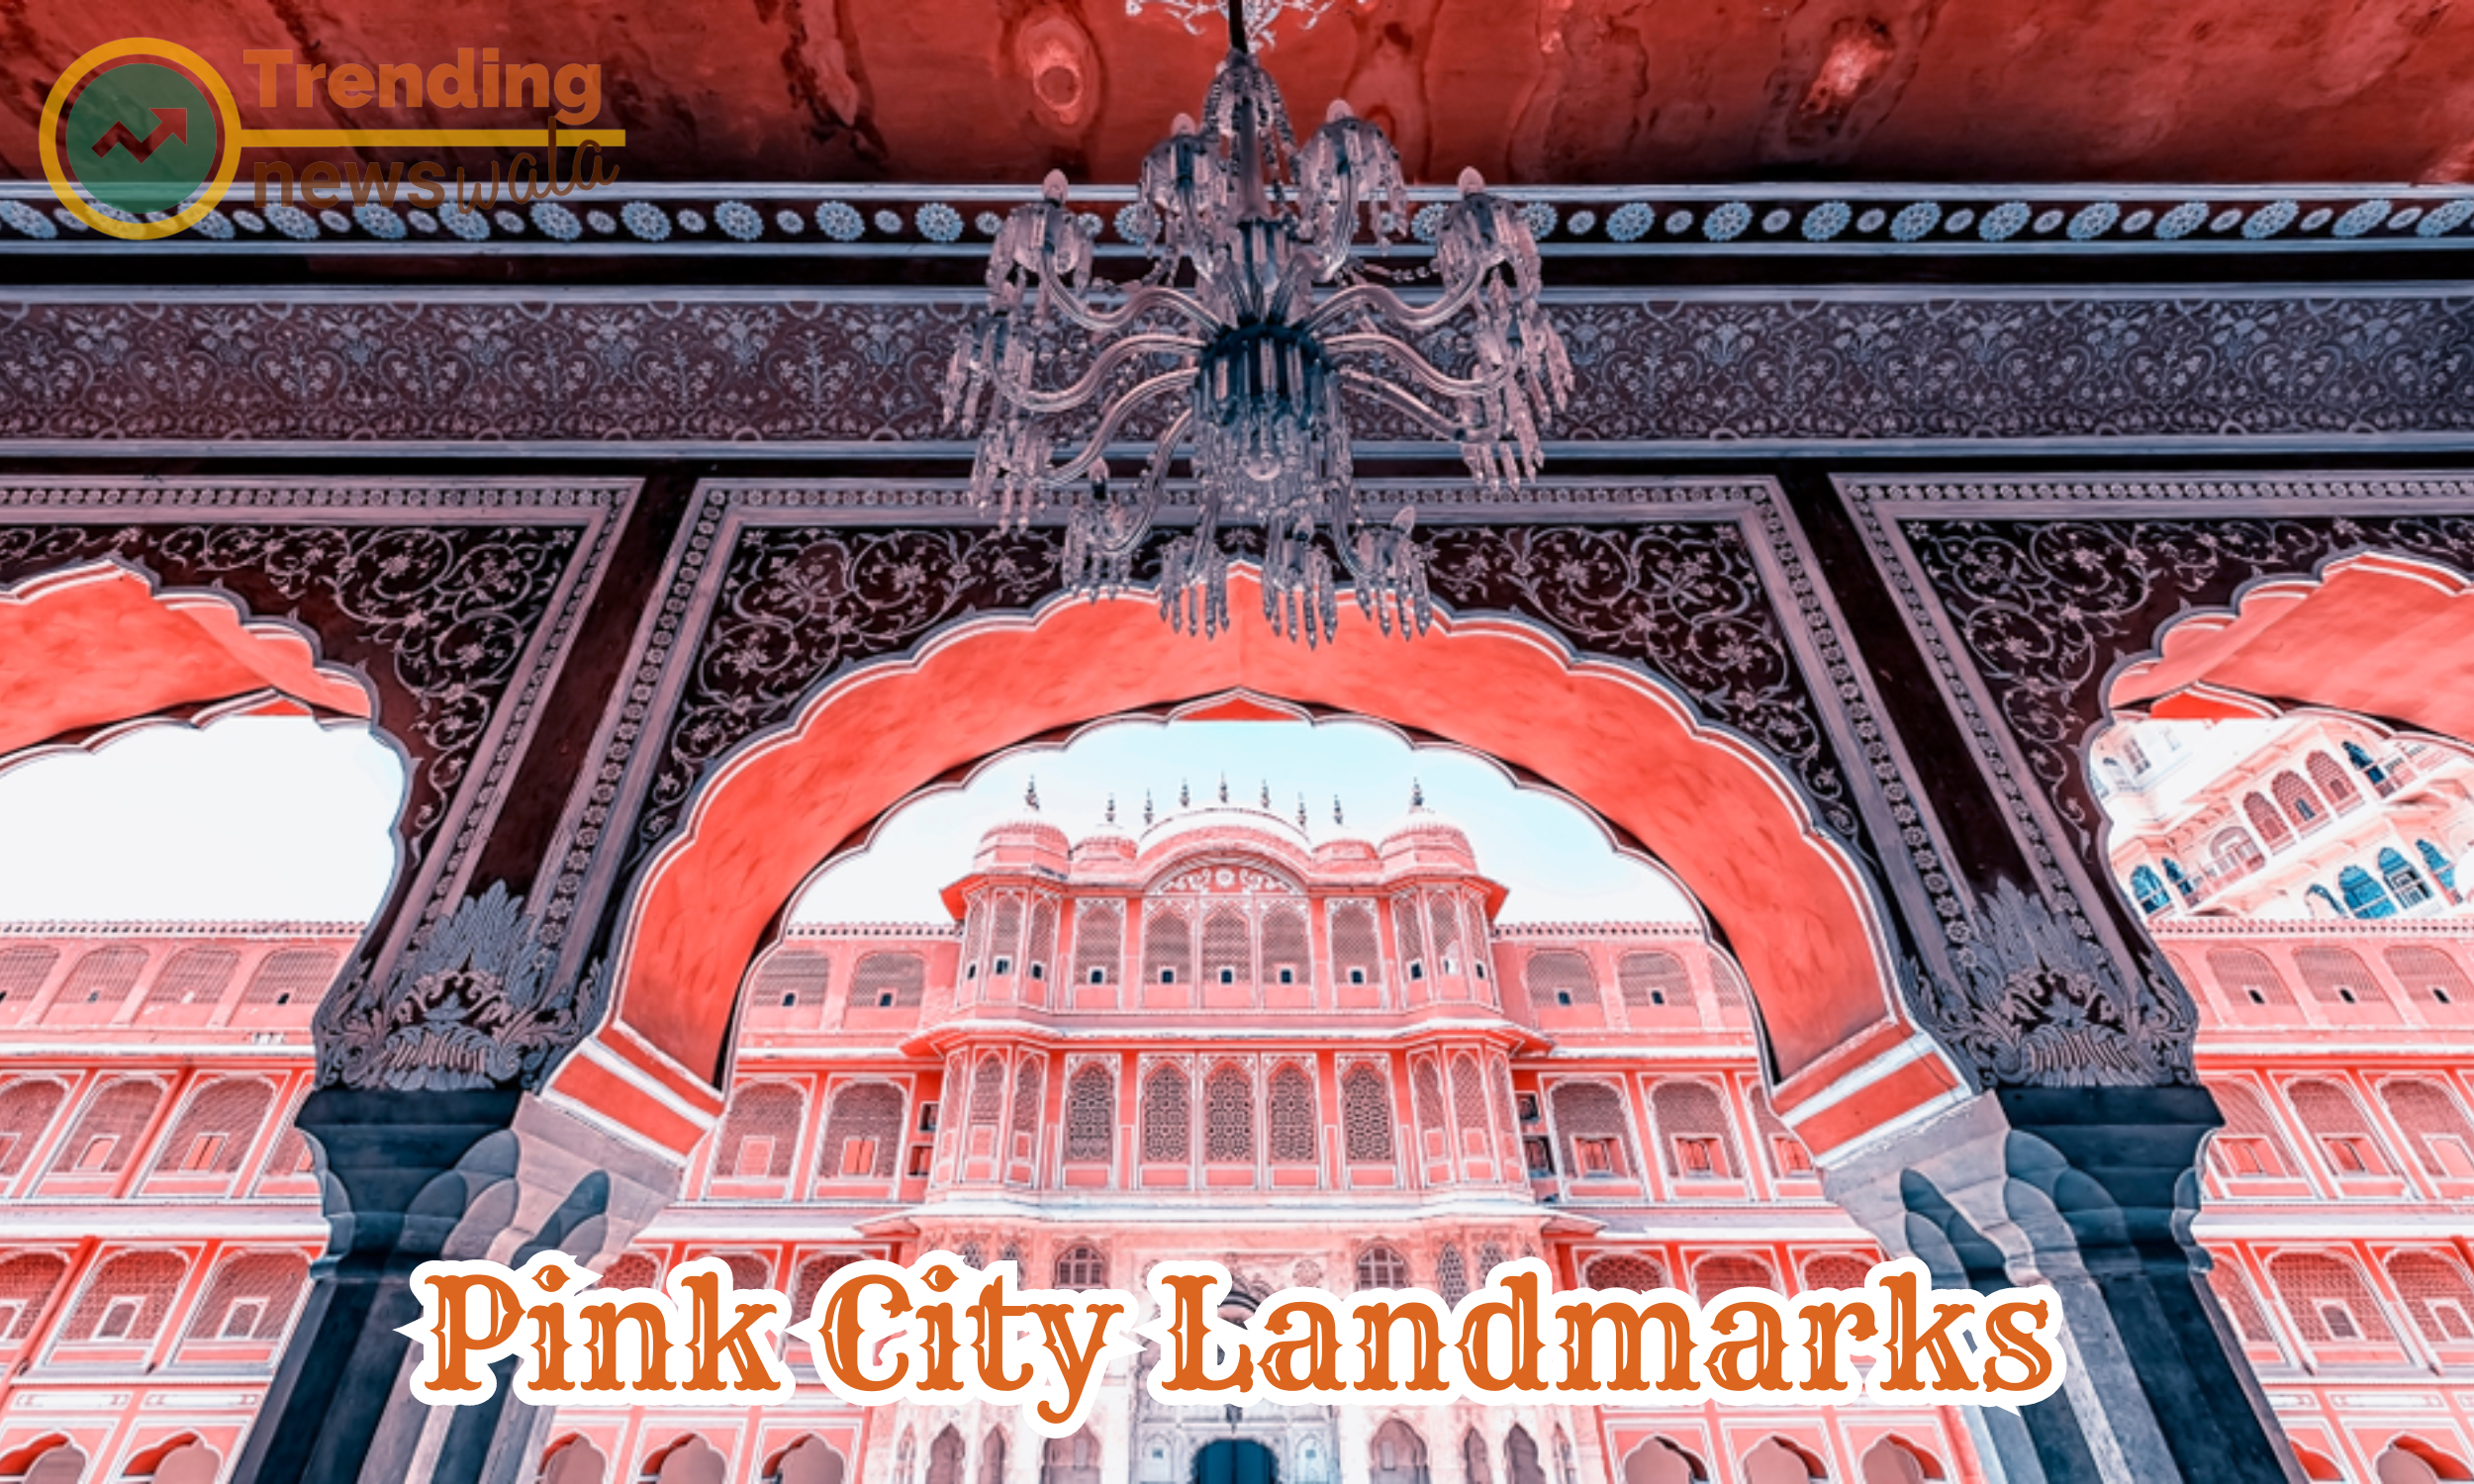 Here are some prominent landmarks in Jaipur, often referred to as the Pink City